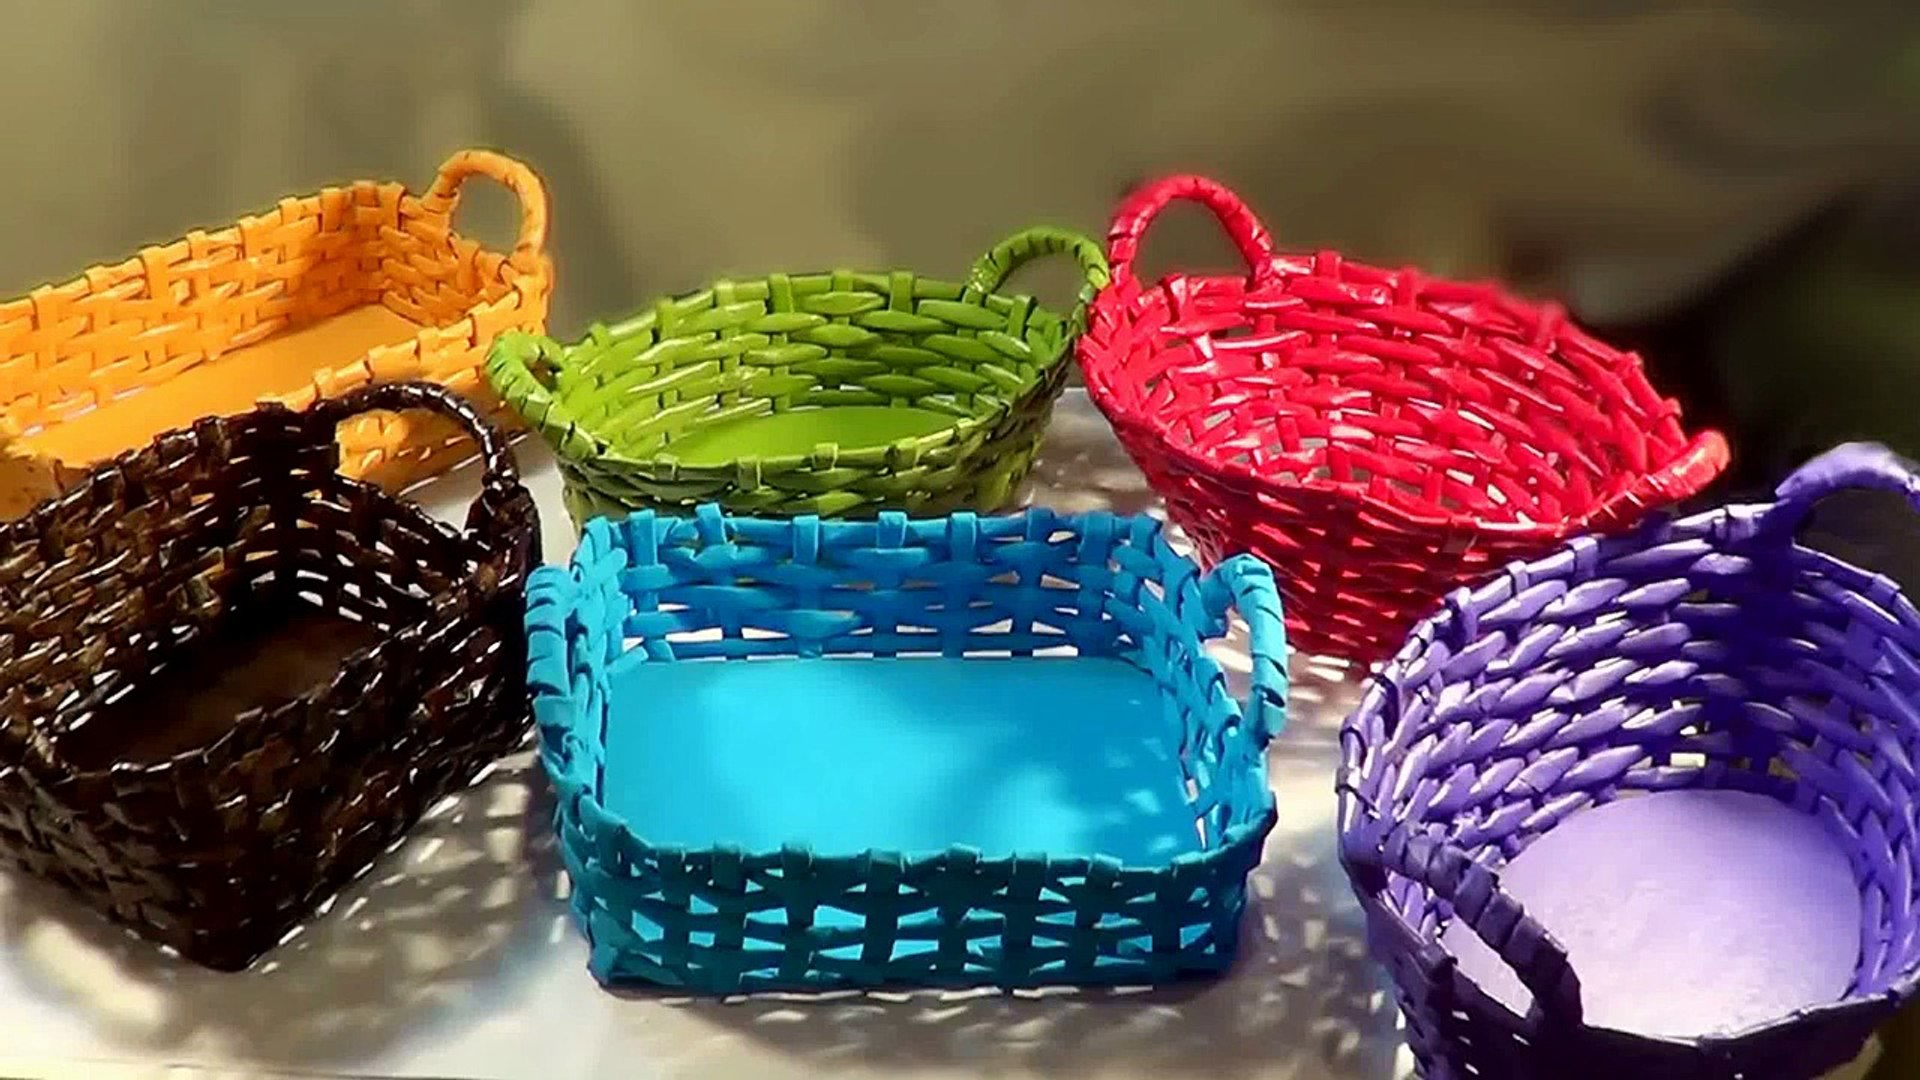 How to make paper Basket with Handle - video Dailymotion